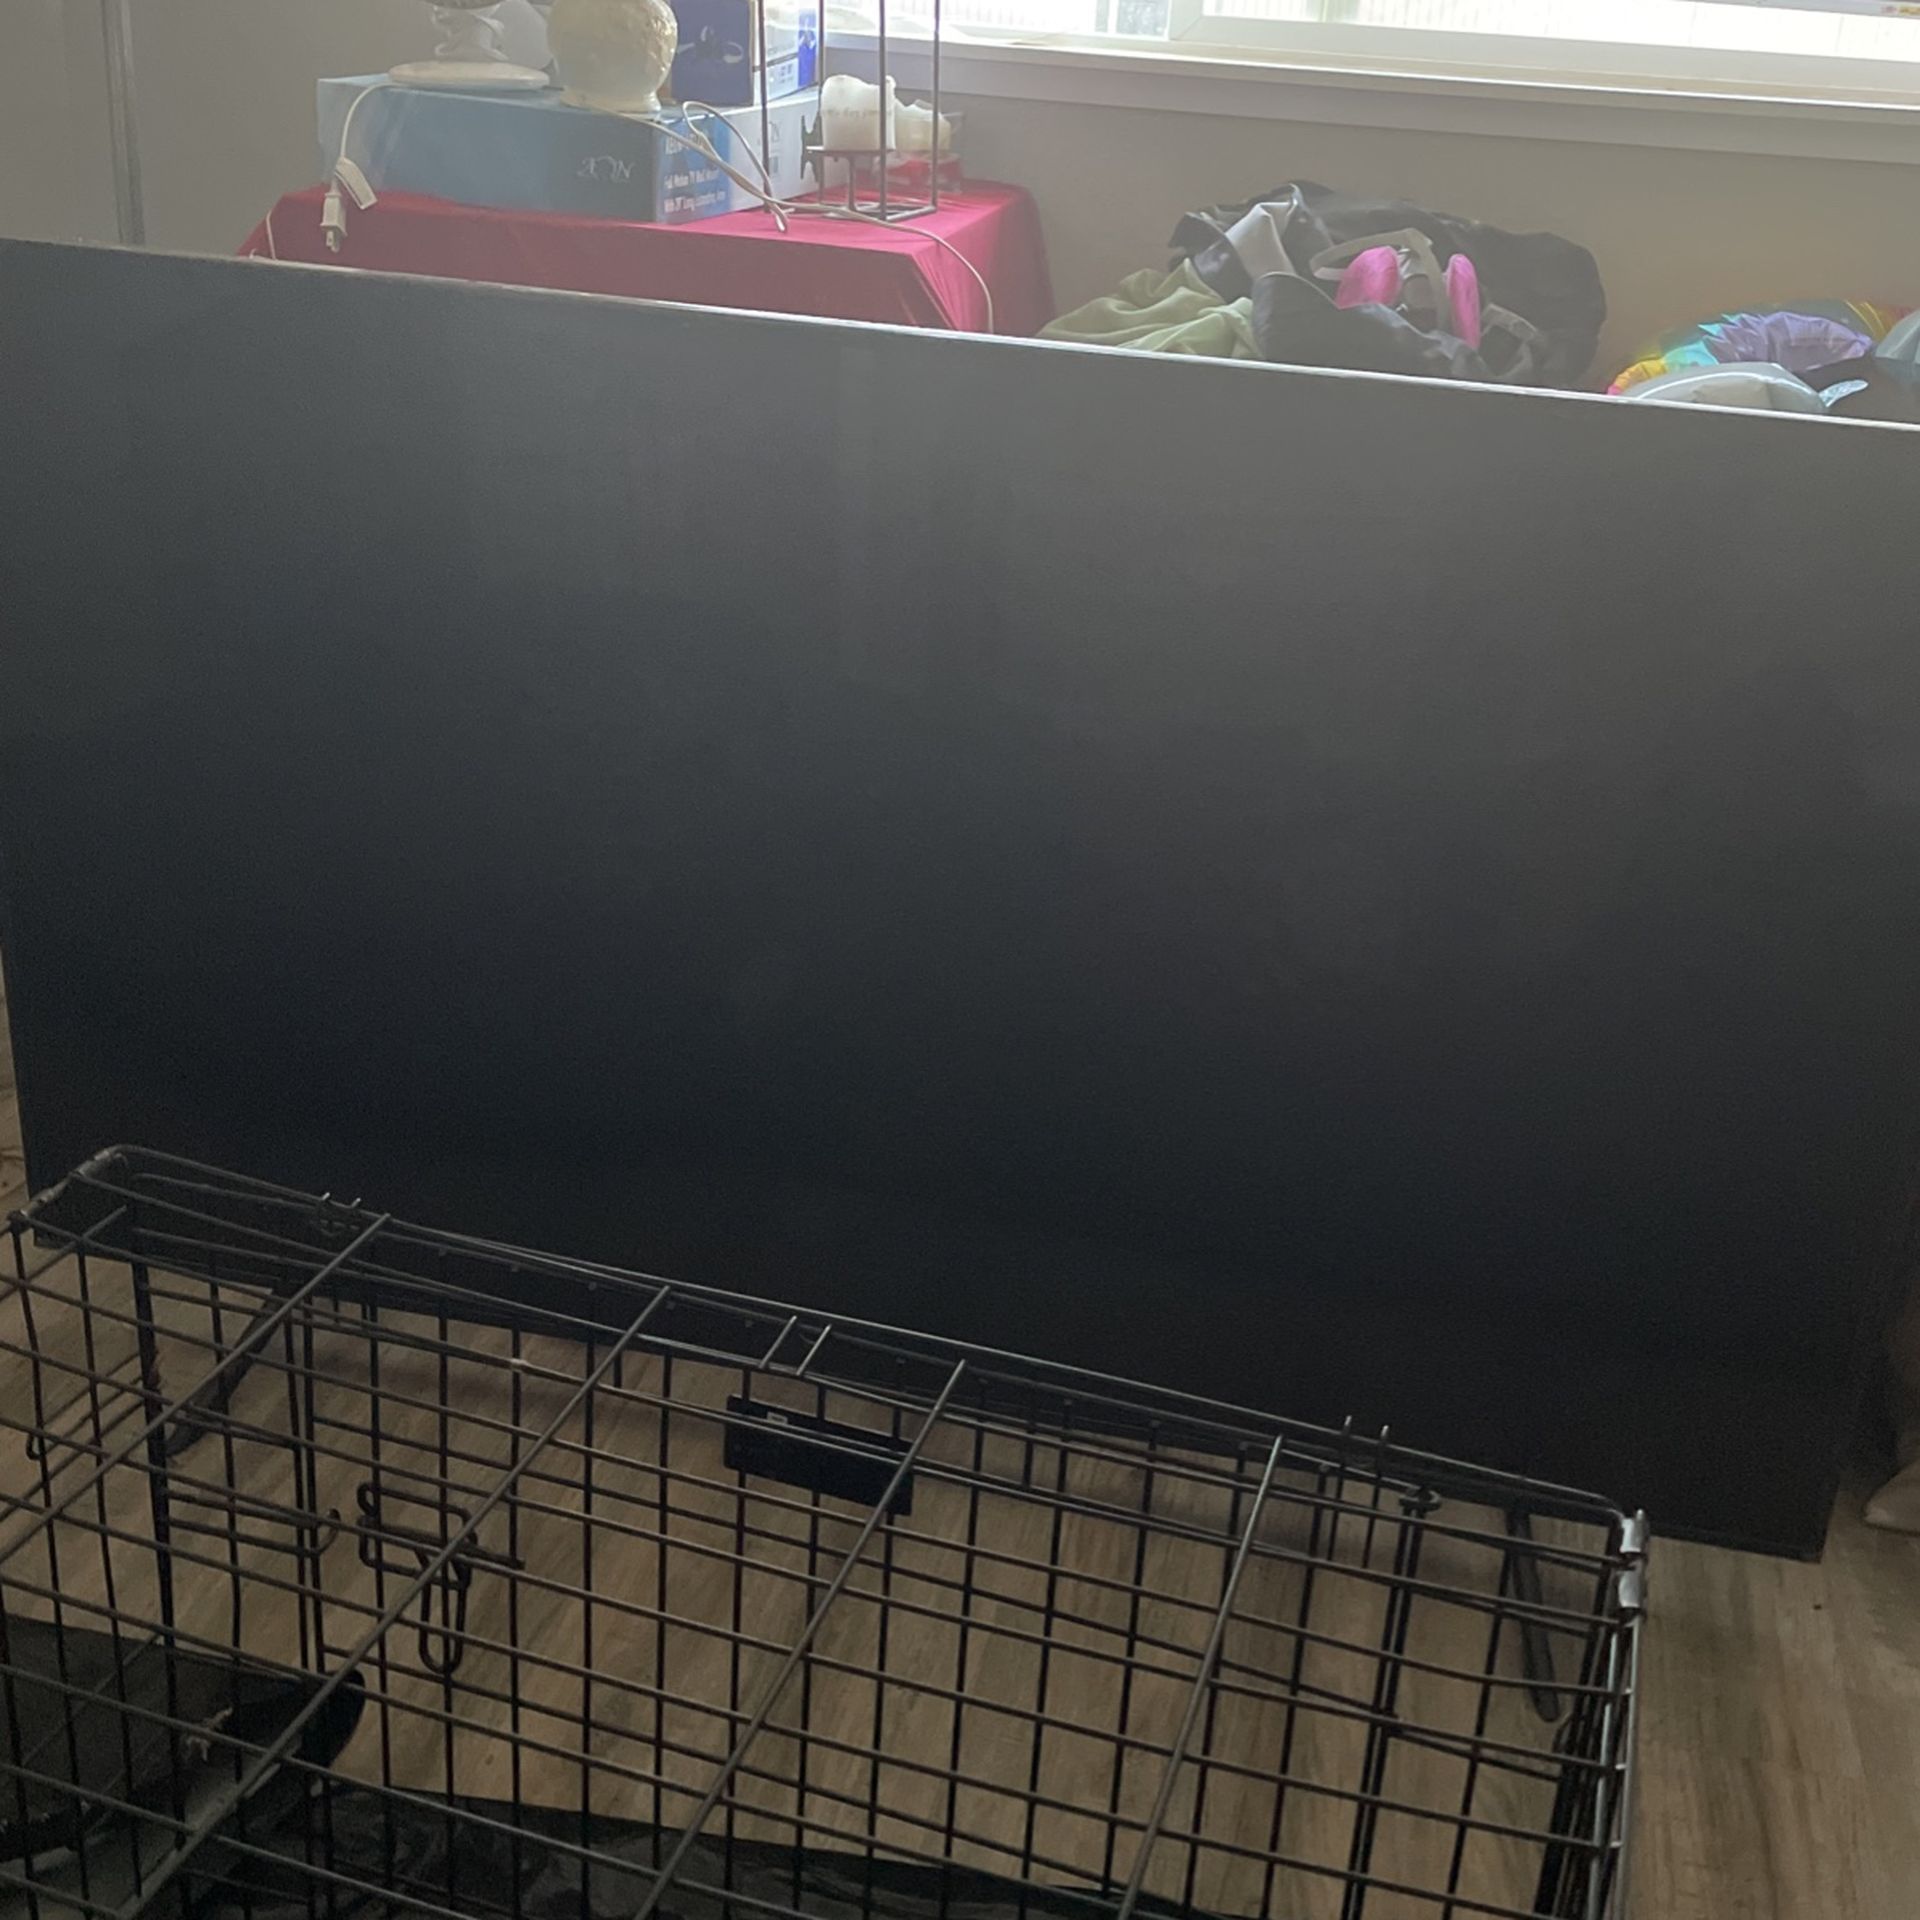 75 Inch Tv (PLEASE READ DETAILS BEFORE MESSAGING)